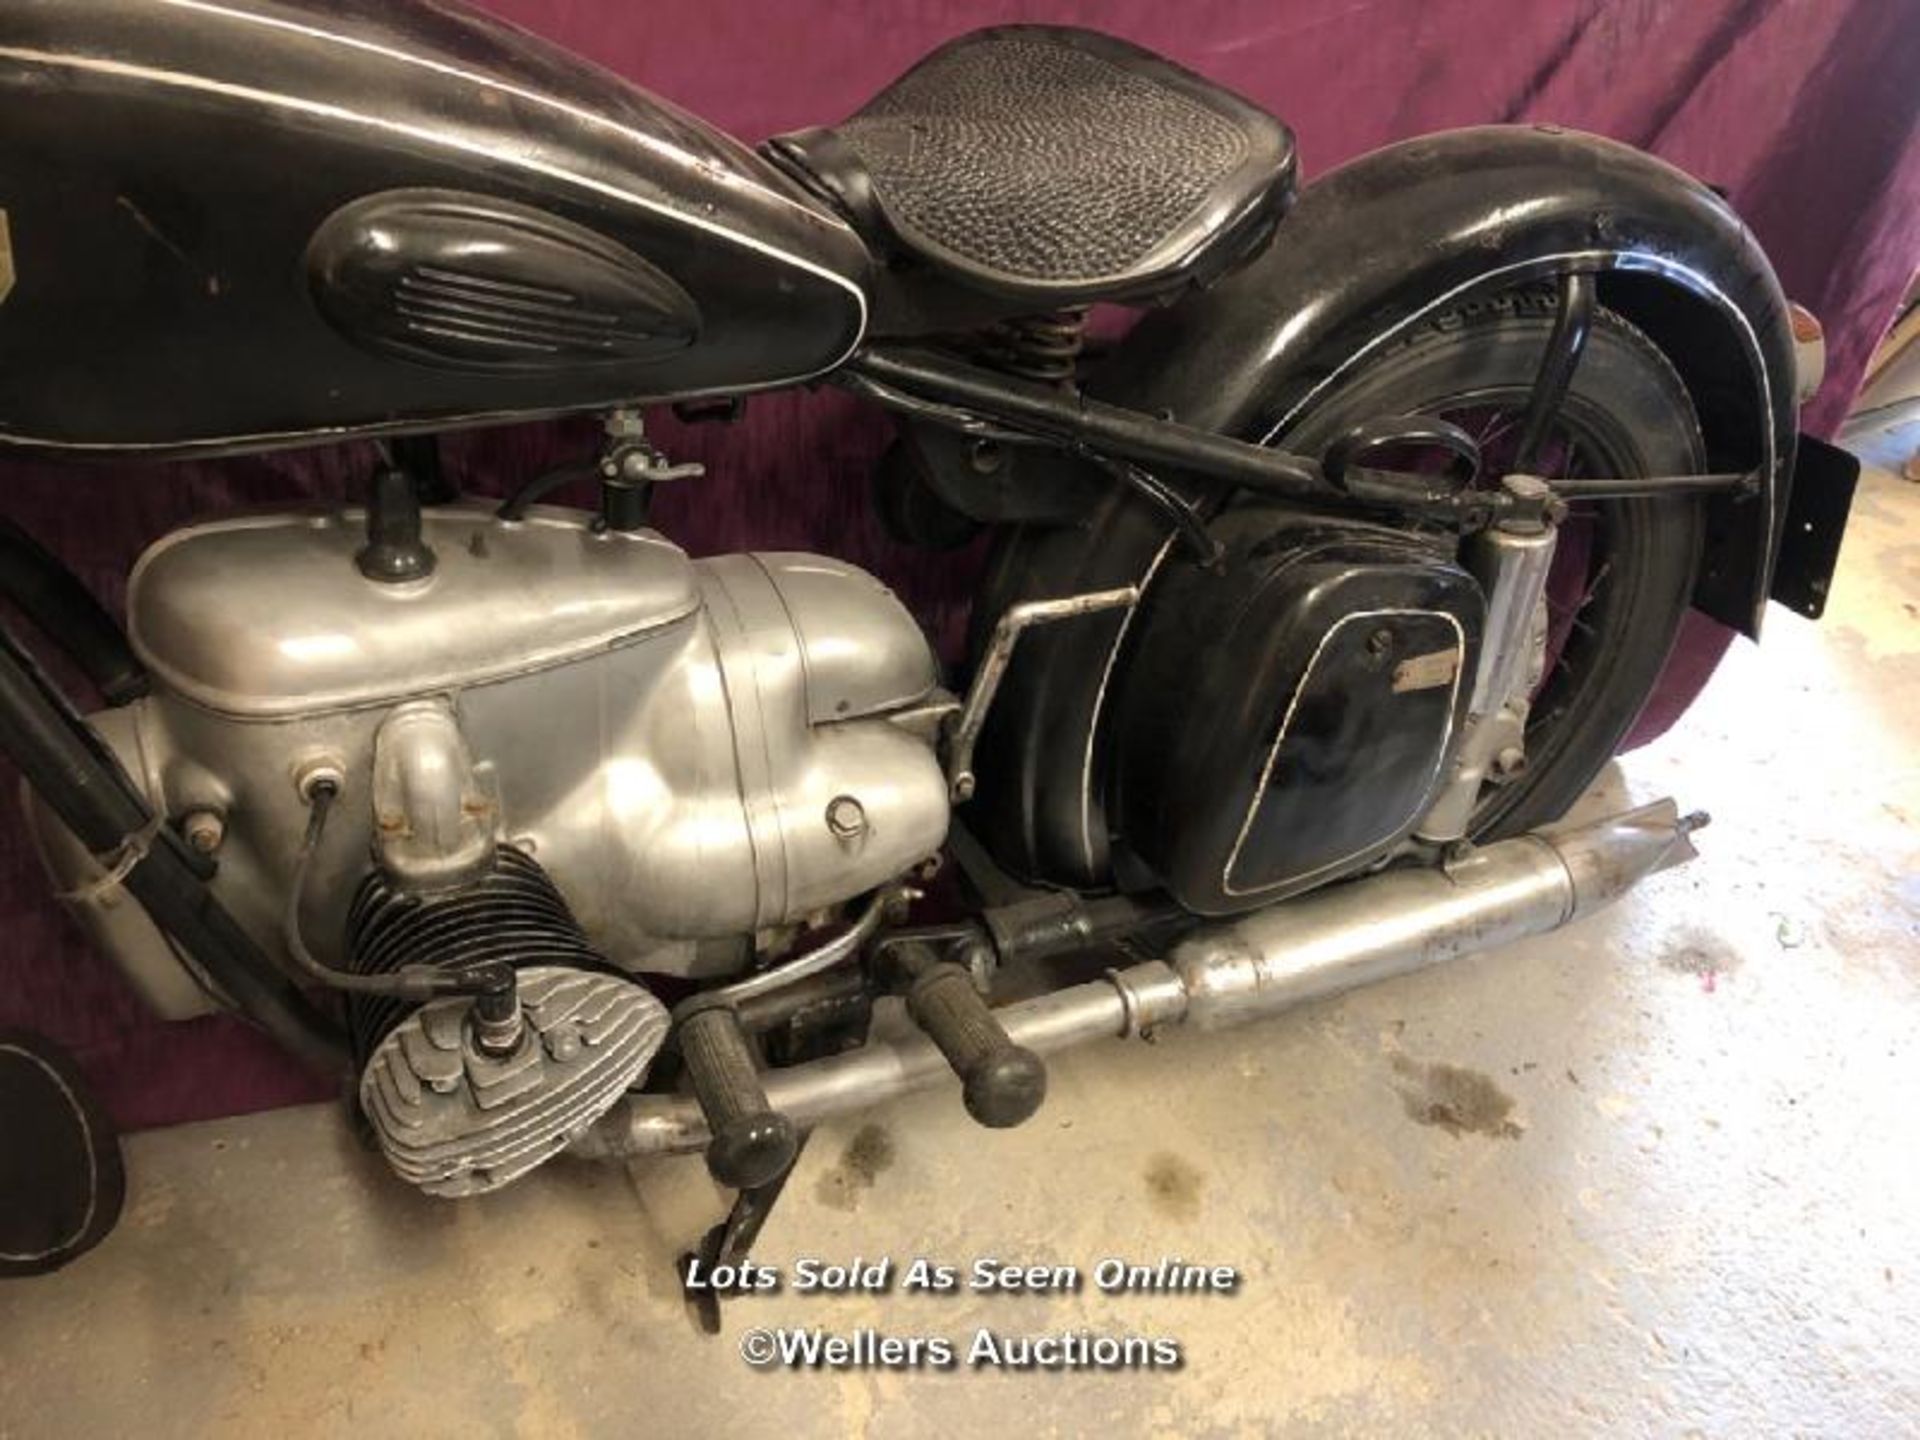 IFA 350 HORIZONTALLY OPPOSED TWIN CYLINDER 1954 MOTORCYCLE, TAX EXEMPT, RUNS WITH GOOD - Bild 7 aus 12